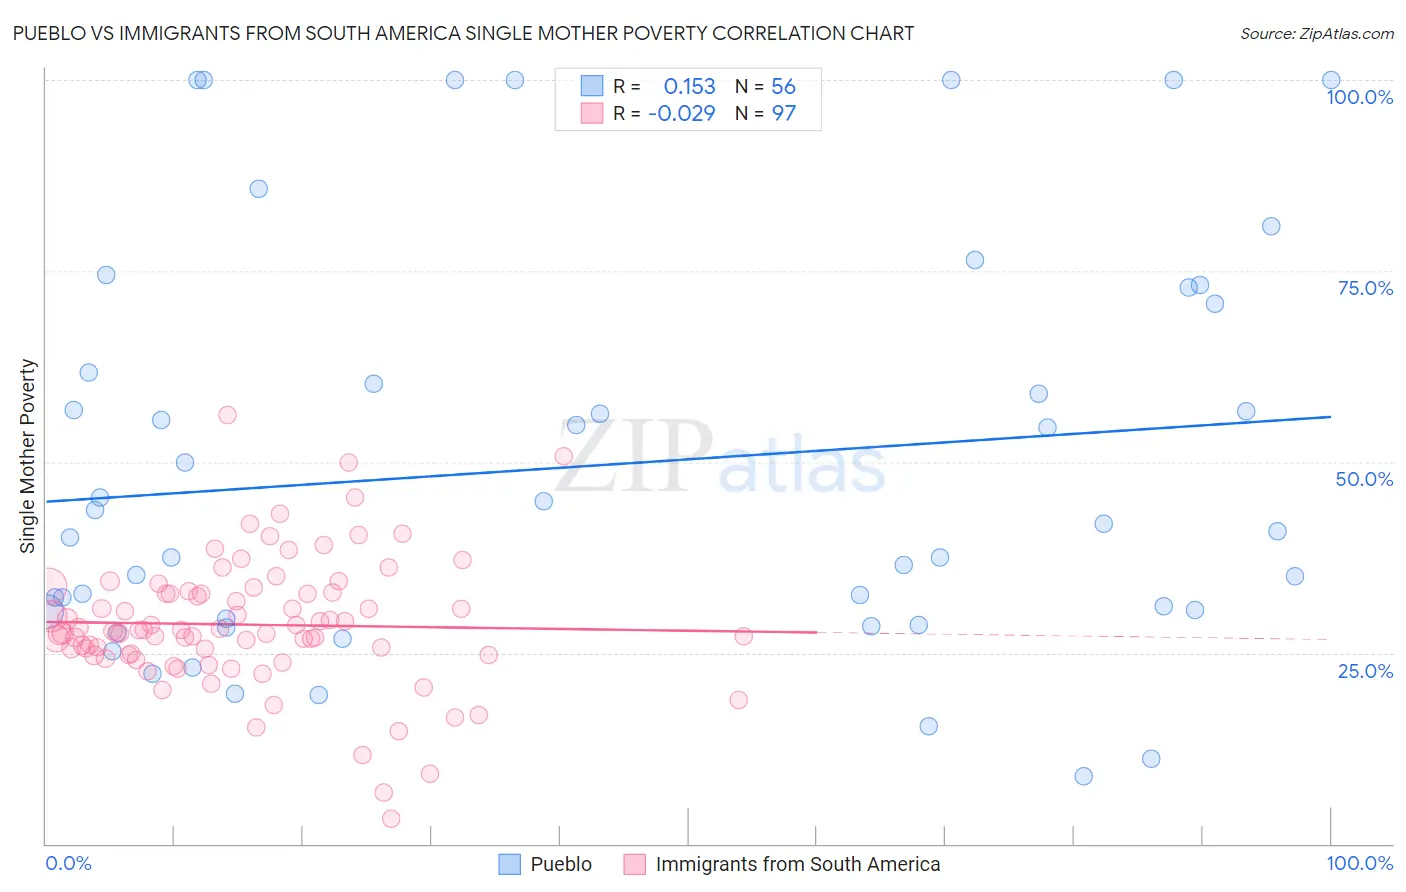 Pueblo vs Immigrants from South America Single Mother Poverty